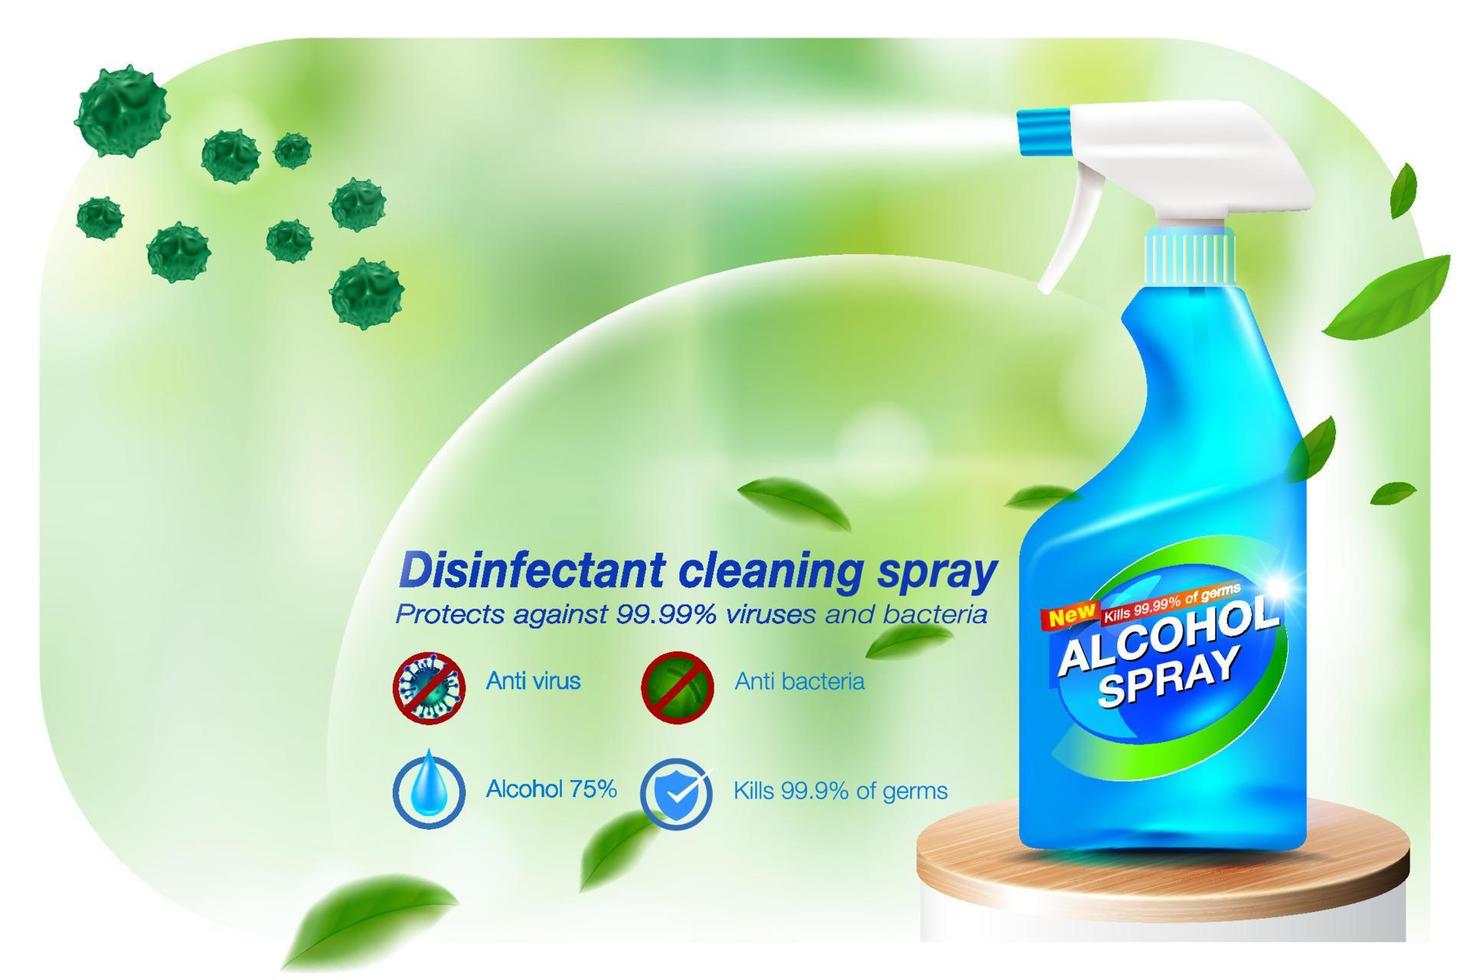 Ads Disinfectant cleaning spray hand sanitizer spray alcohol components. vector